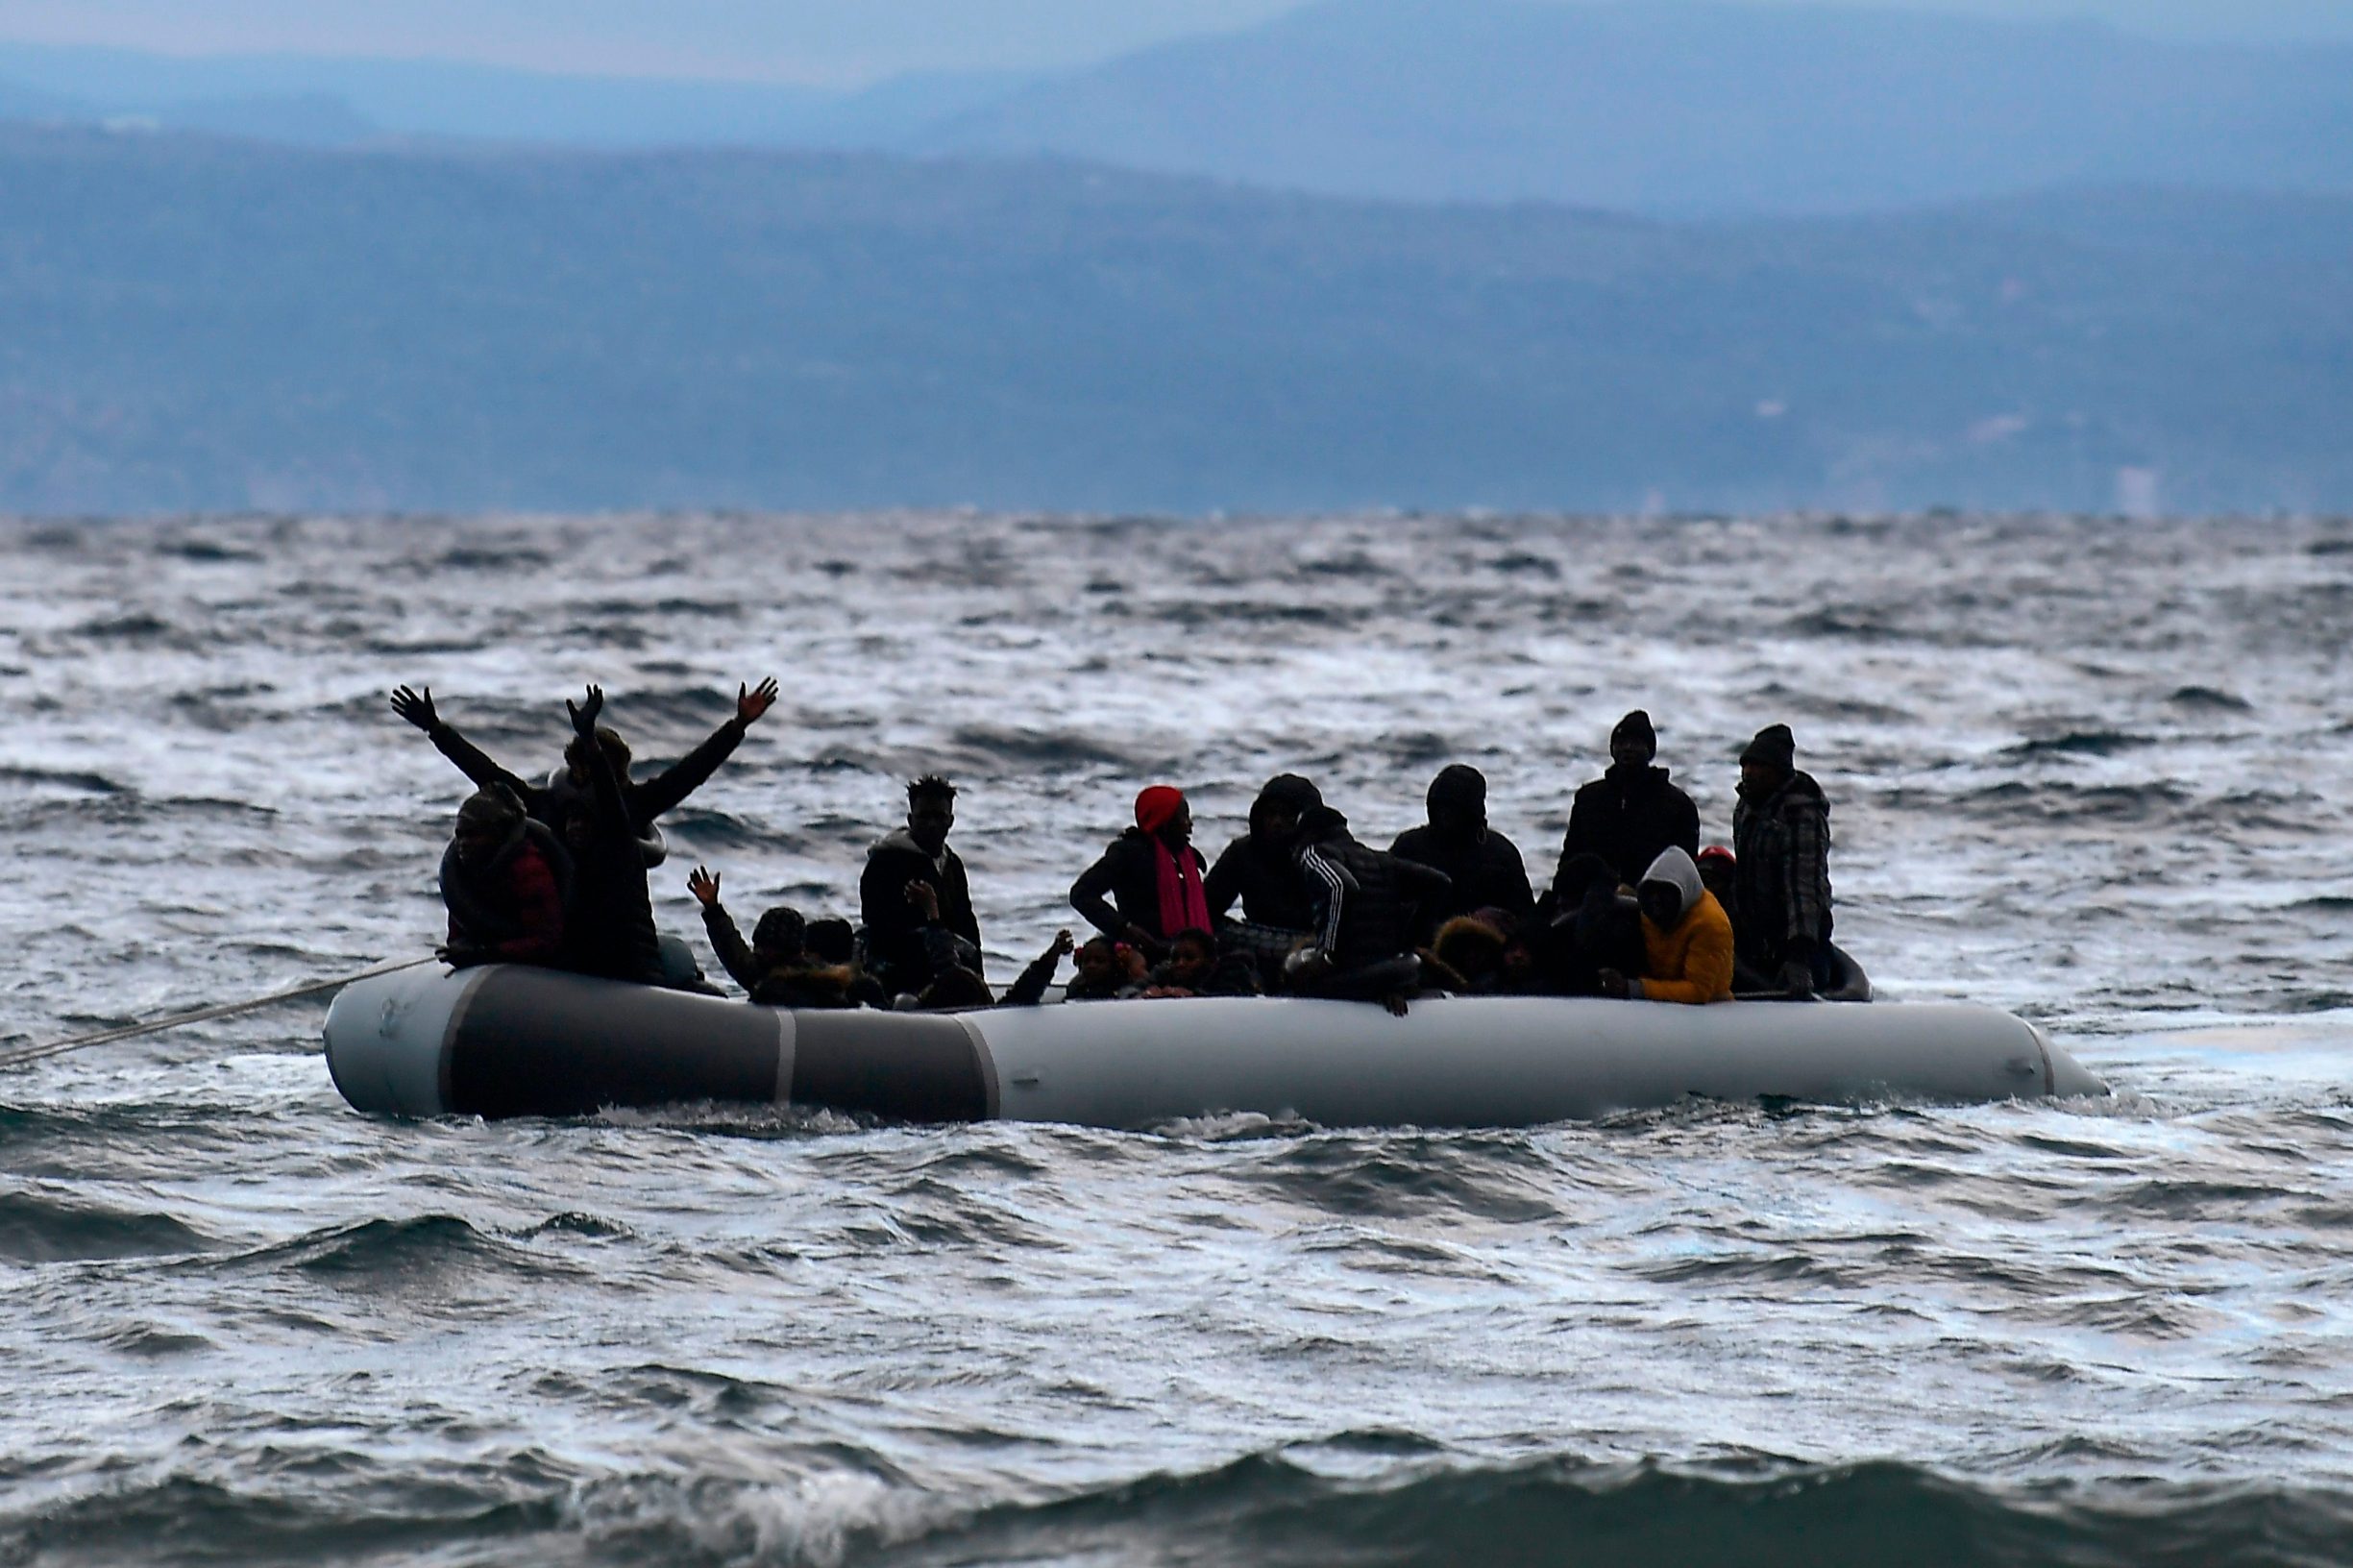 TOPSHOT - A dinghy transporting 27 refugees and migrants originating from Gambia and the Republic of Congo is pulled towards Lesbos island after being rescued by a war ship during their sea crossing between Turkey and Greece on February 29, 2020. - Greece blocked hundreds of migrants trying to enter the country on Friday after Turkey said it would open the gates for refugees from Syria to enter the European Union. Turkey's threat came hours after a Syrian strike on Thursday killed 33 of its soldiers in Idlib and was aimed at forcing European governments to do more to support it in its fight against the regime. (Photo by ARIS MESSINIS / AFP)